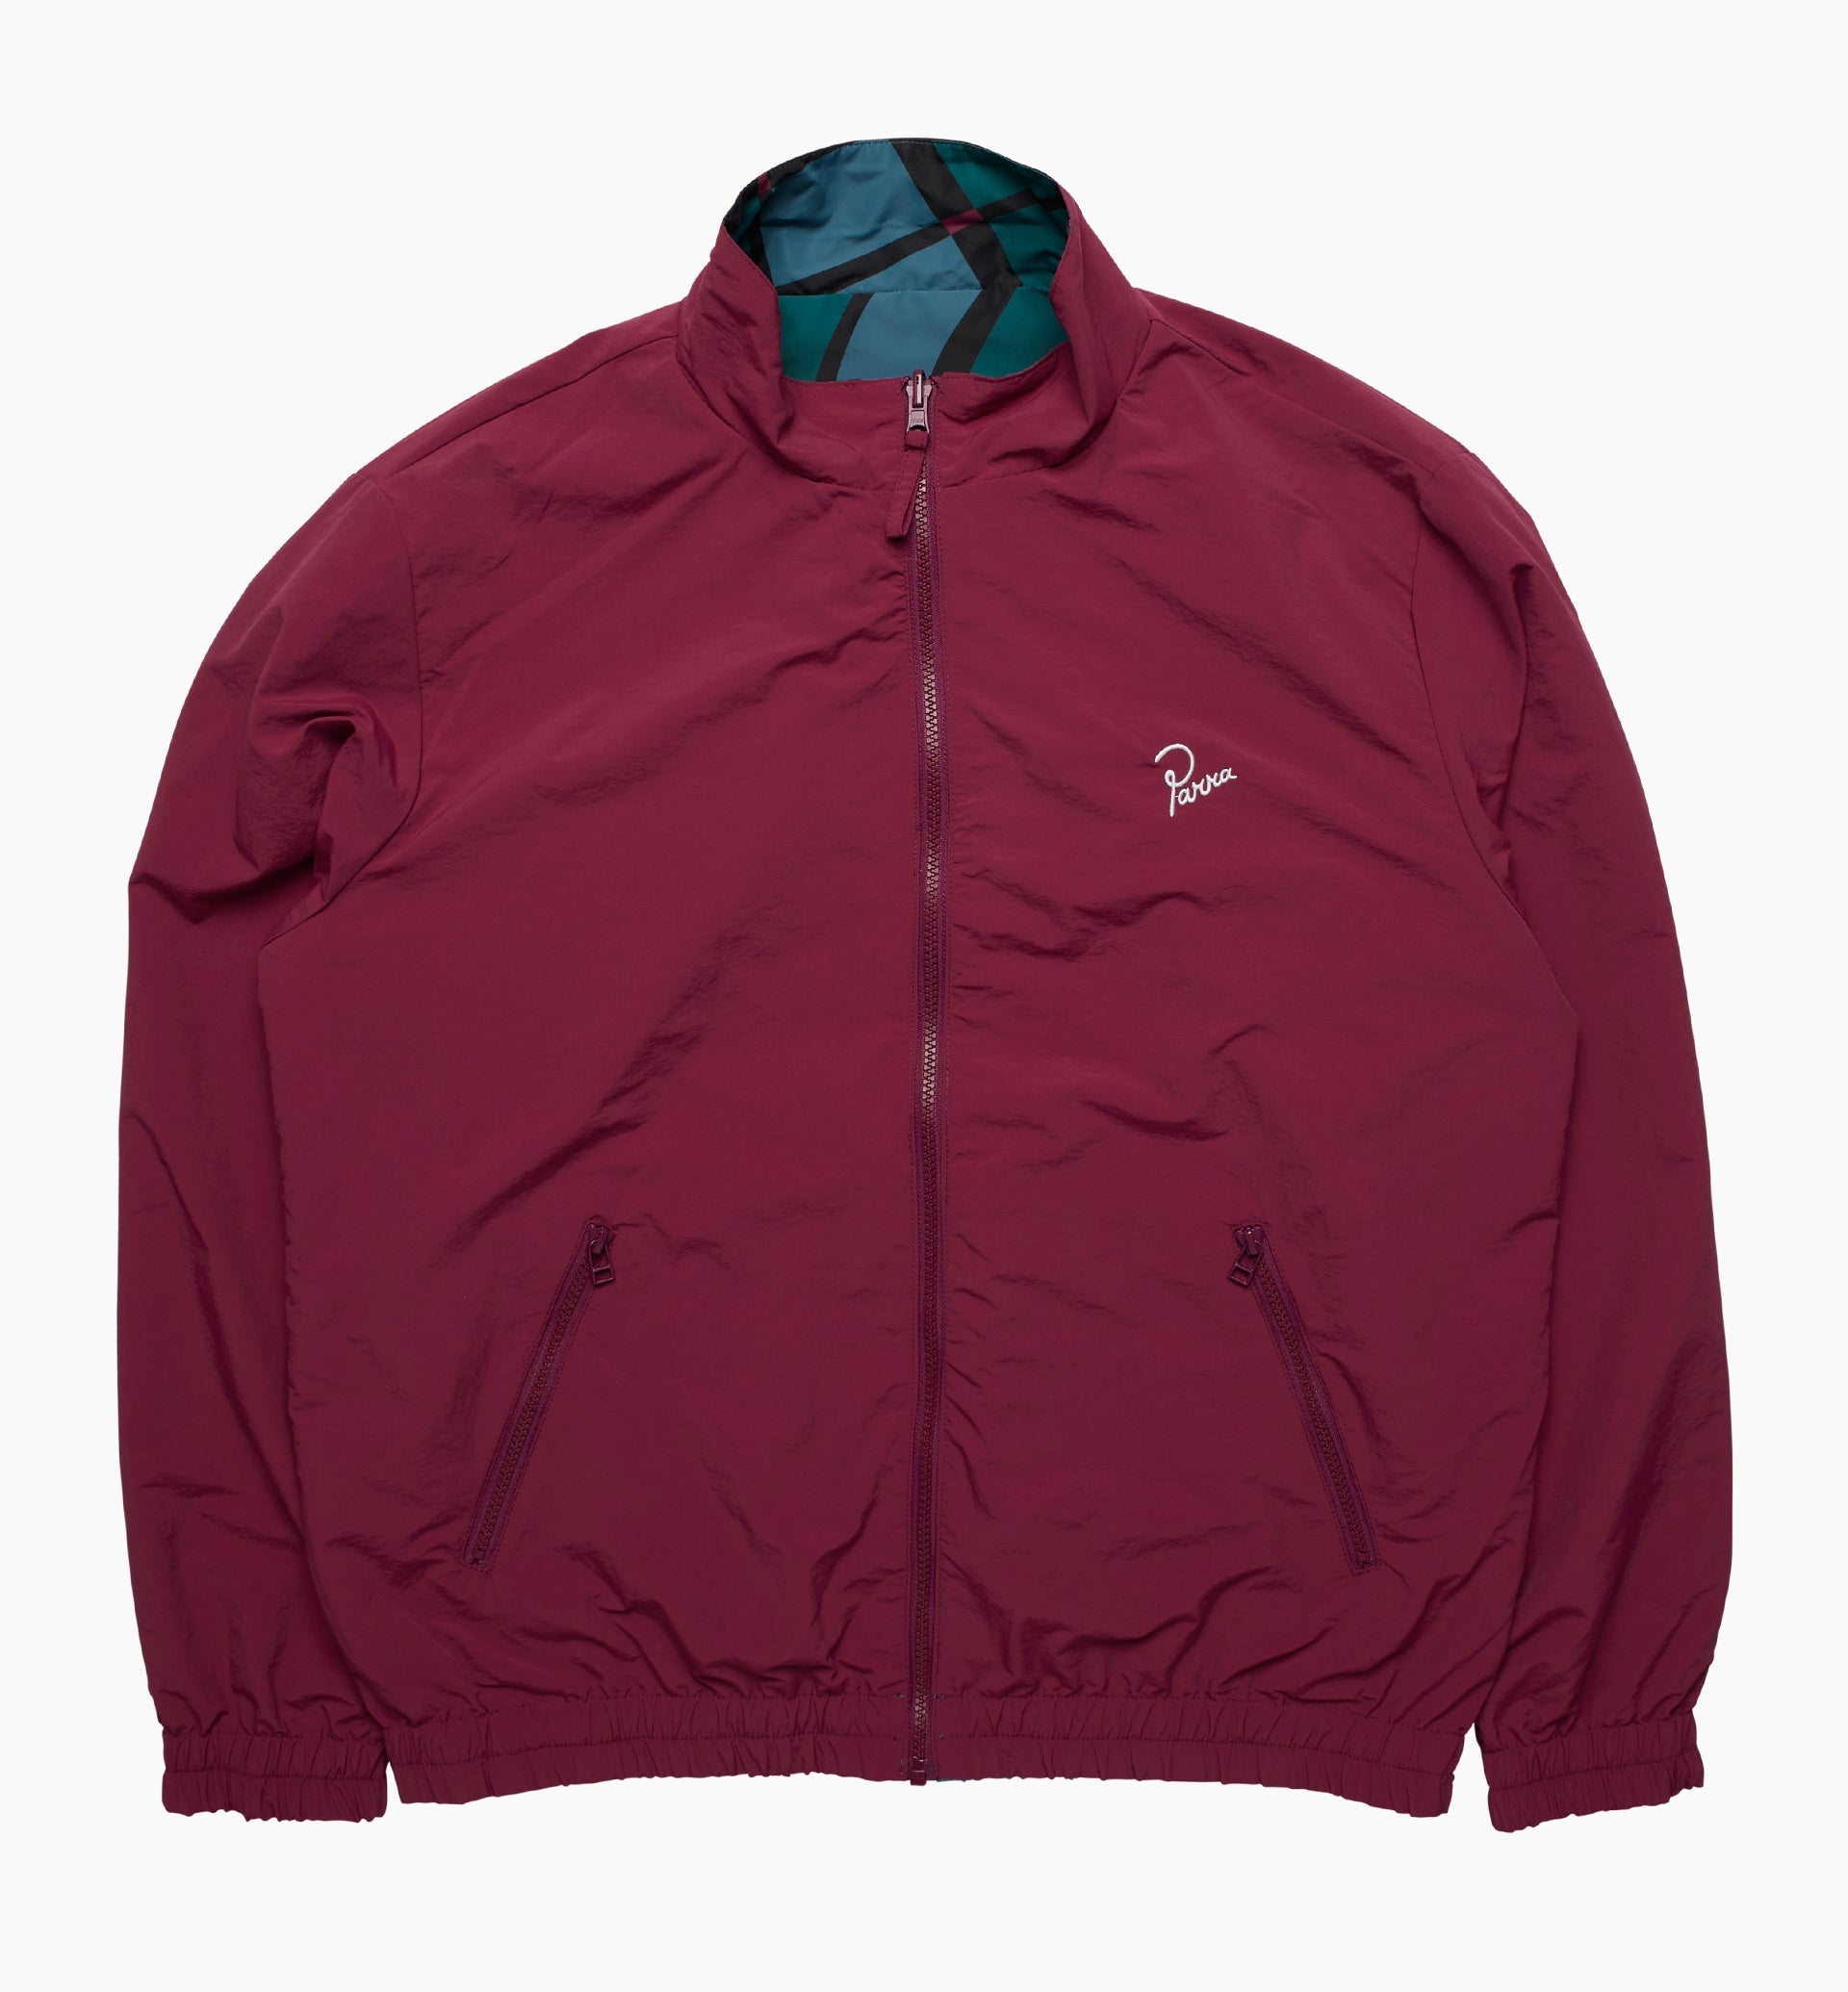 Parra - squared waves pattern track top